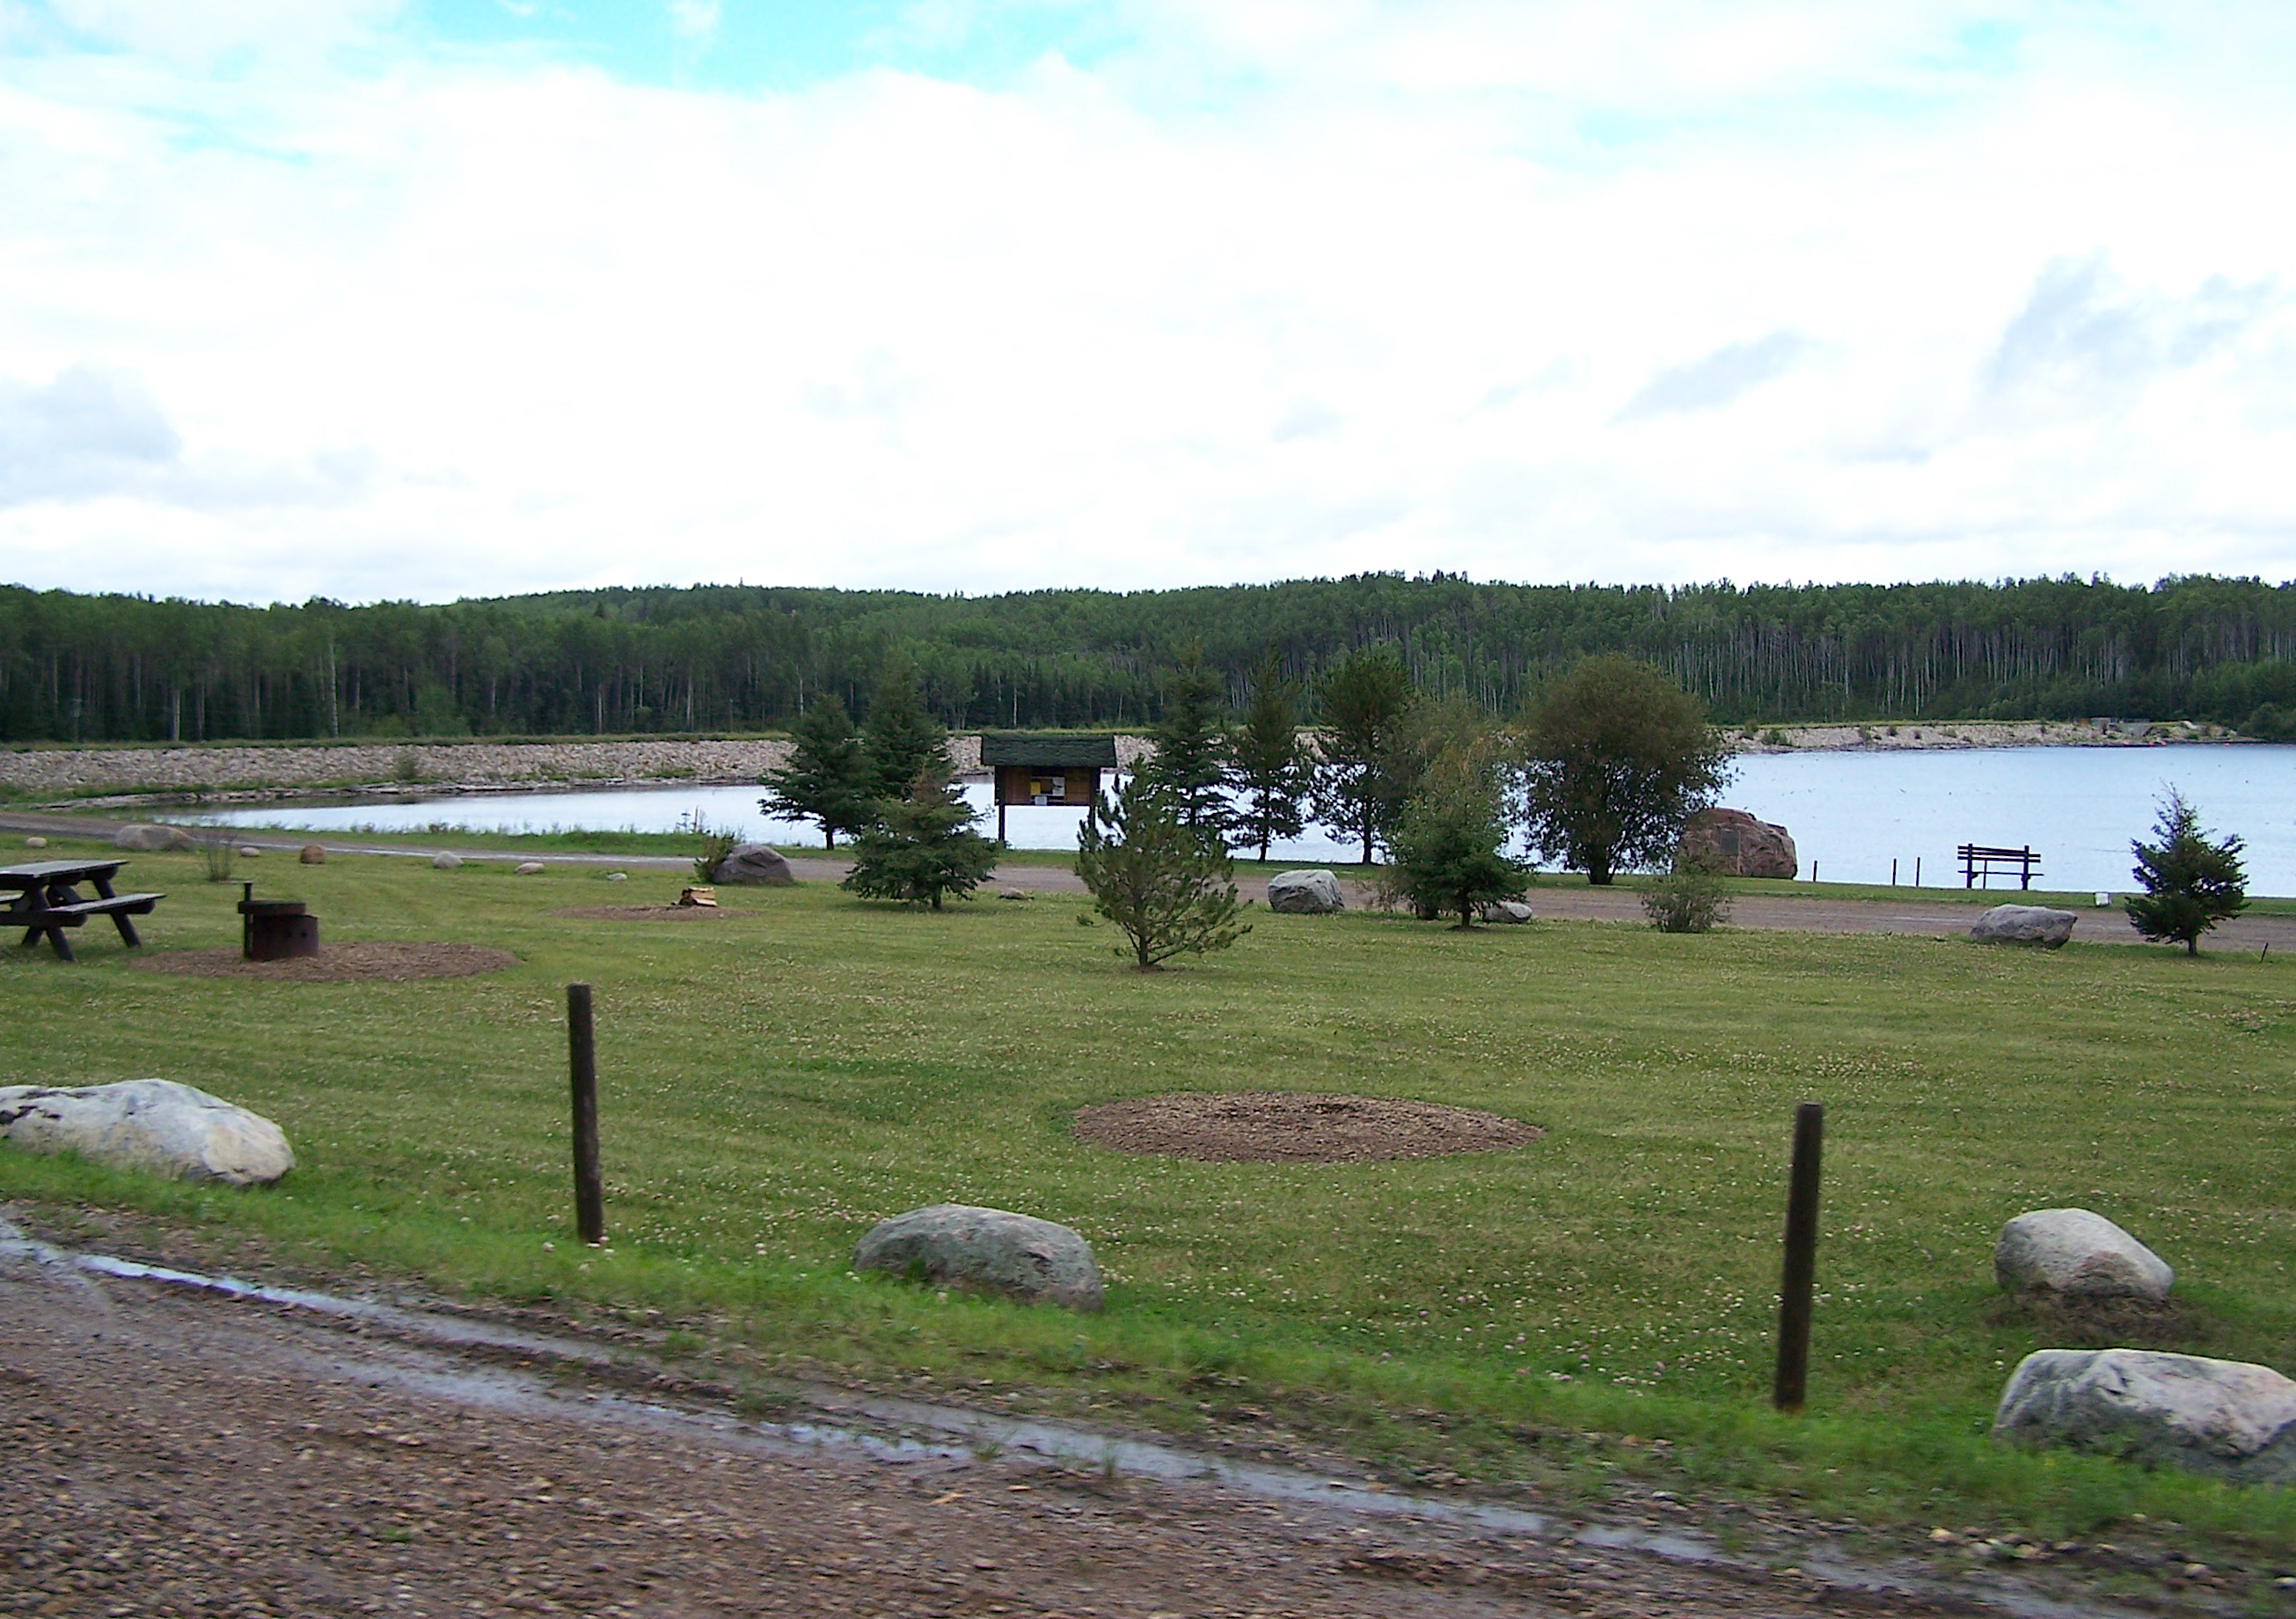 Hutch Lake and recreation area.